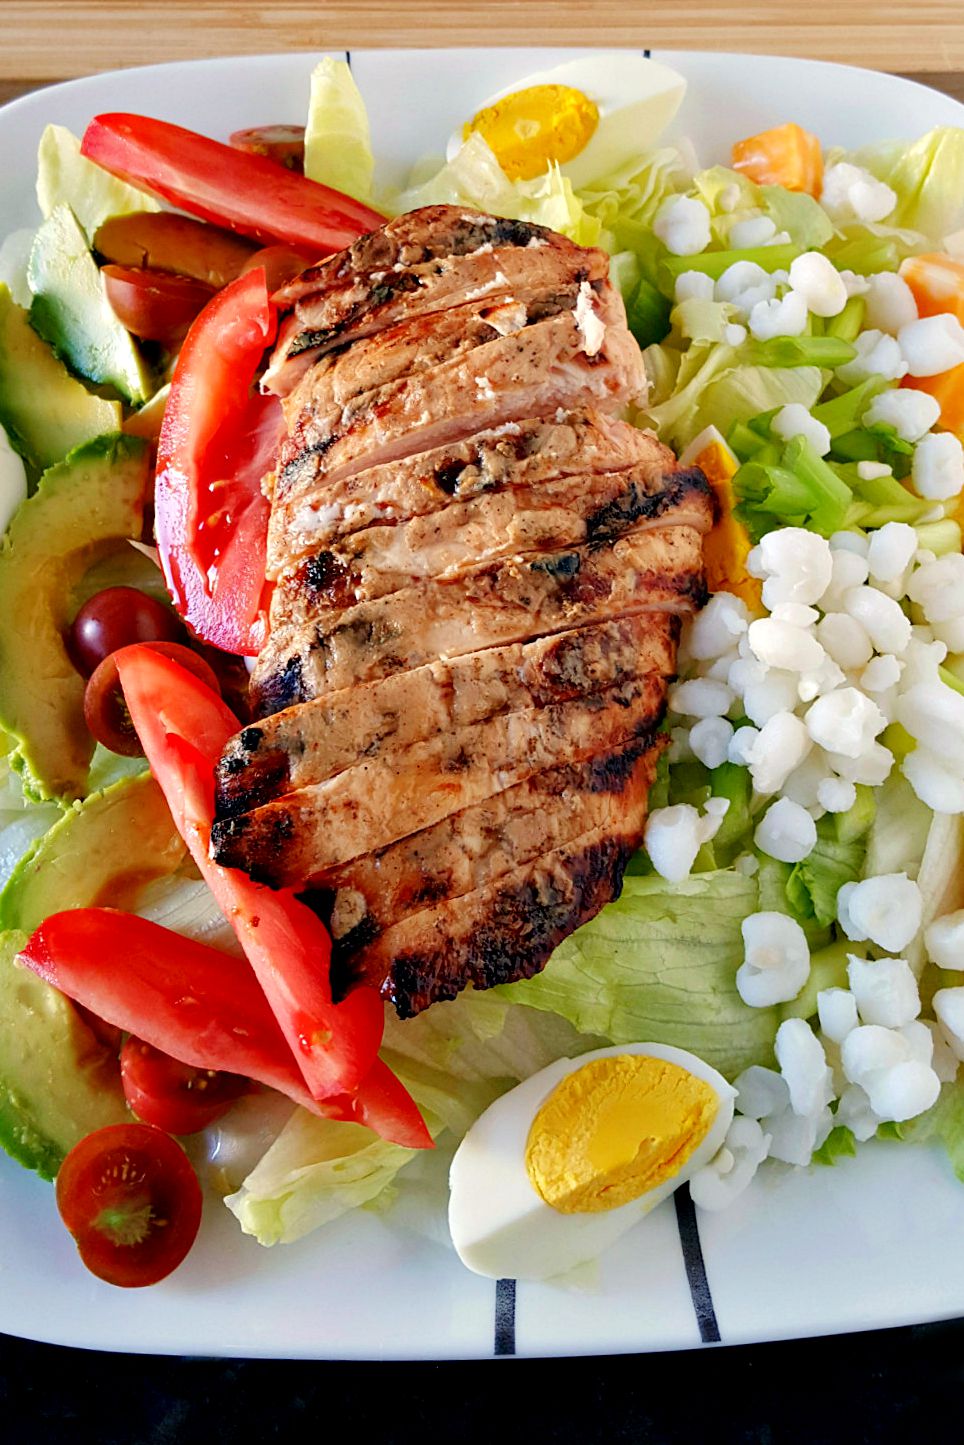 I basted chicken breasts in white barbecue sauce and grilled before slicing and topping this Alabama Cobb Salad. Don't let this white barbecue sauce fool you! It's got a kick!